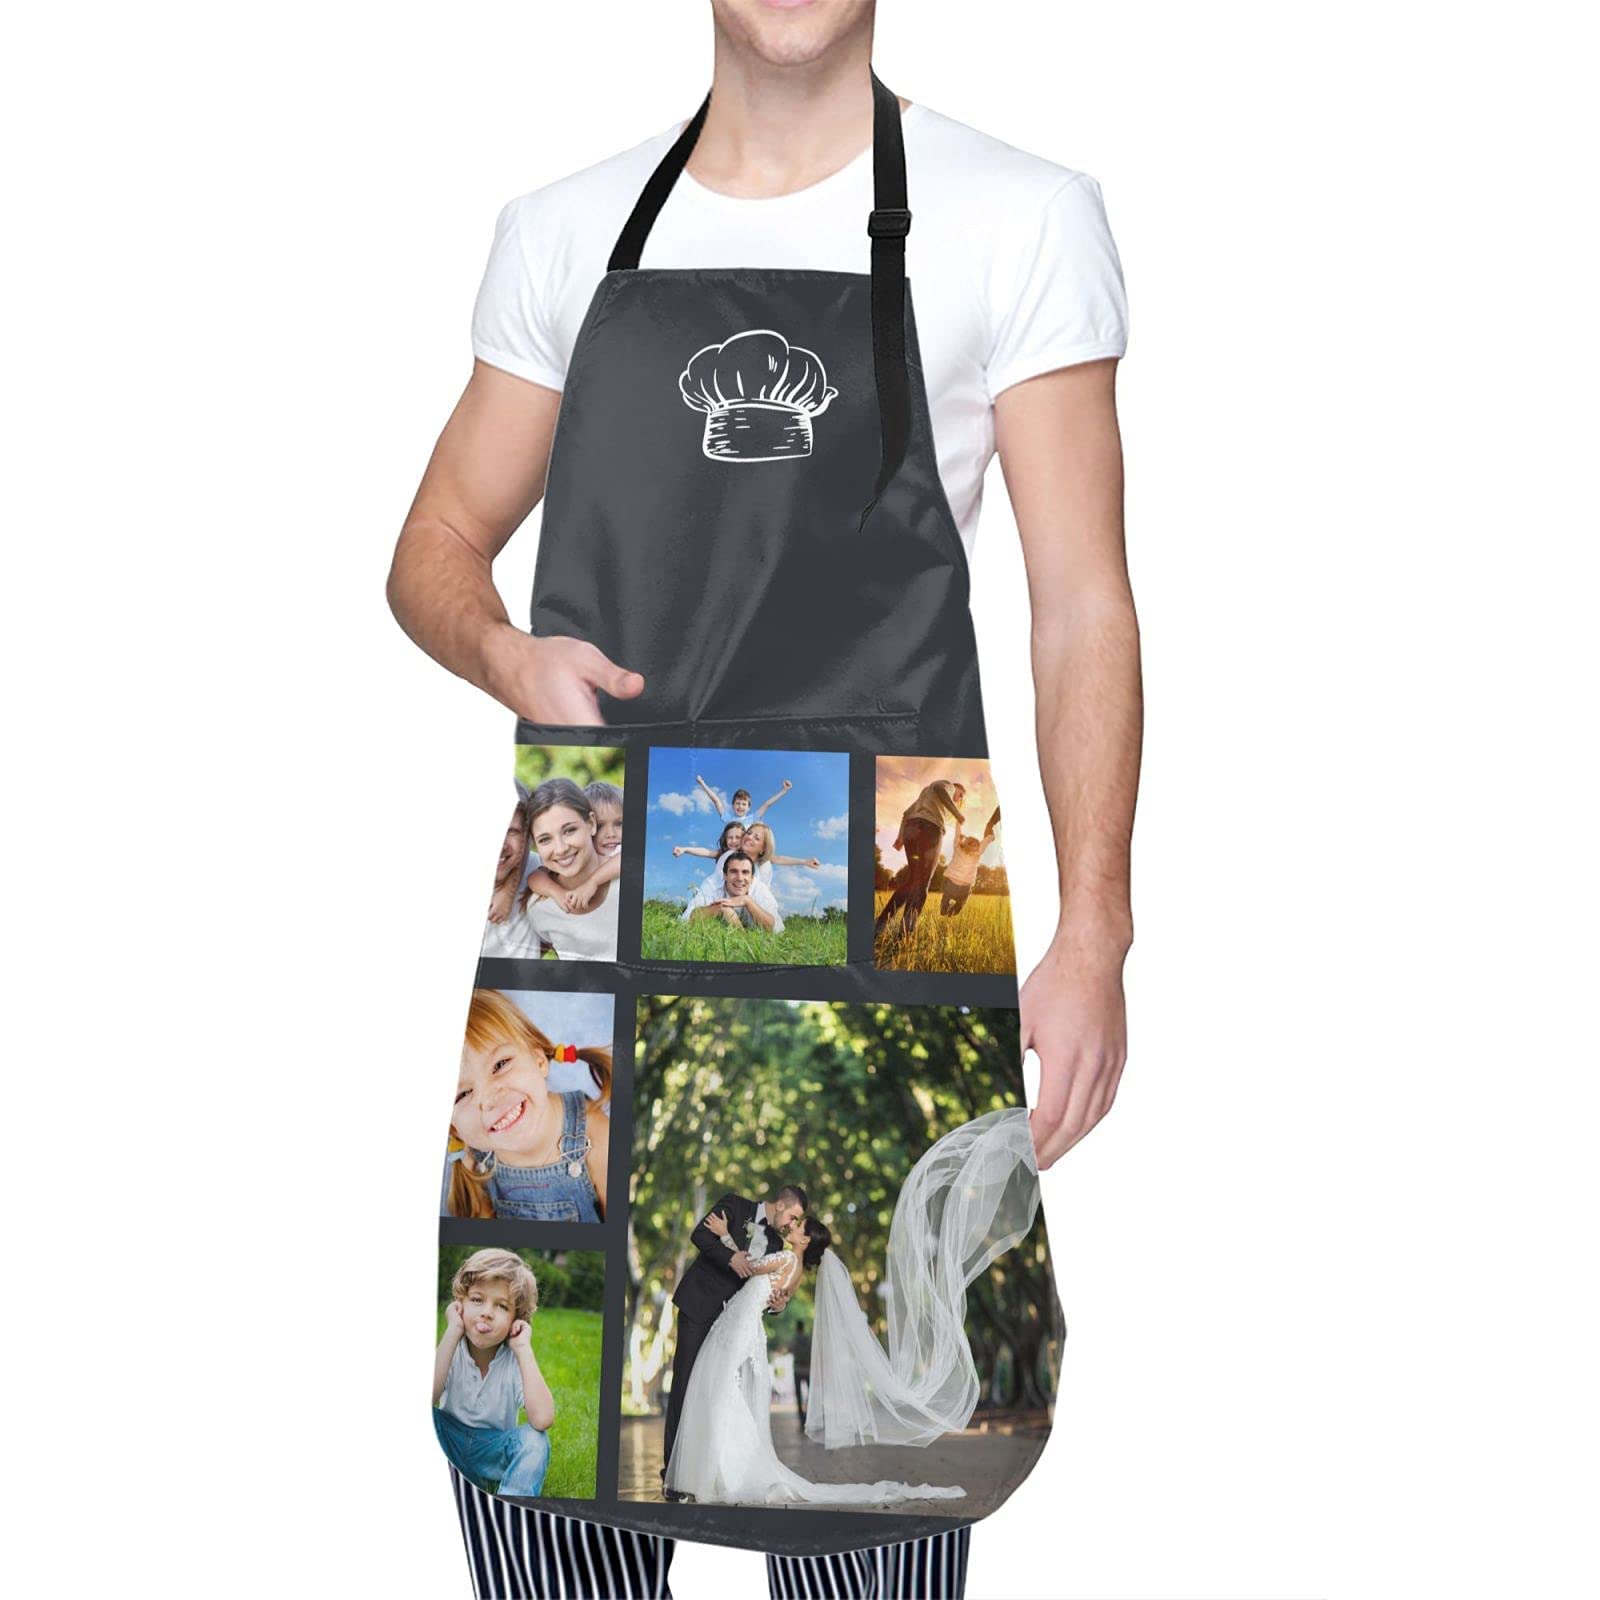 ROAWXKU Custom apron Personalized kitchen aprons for men women cute,BBQ cooking Chef Knives,Add your photo/text Unisex gift Black